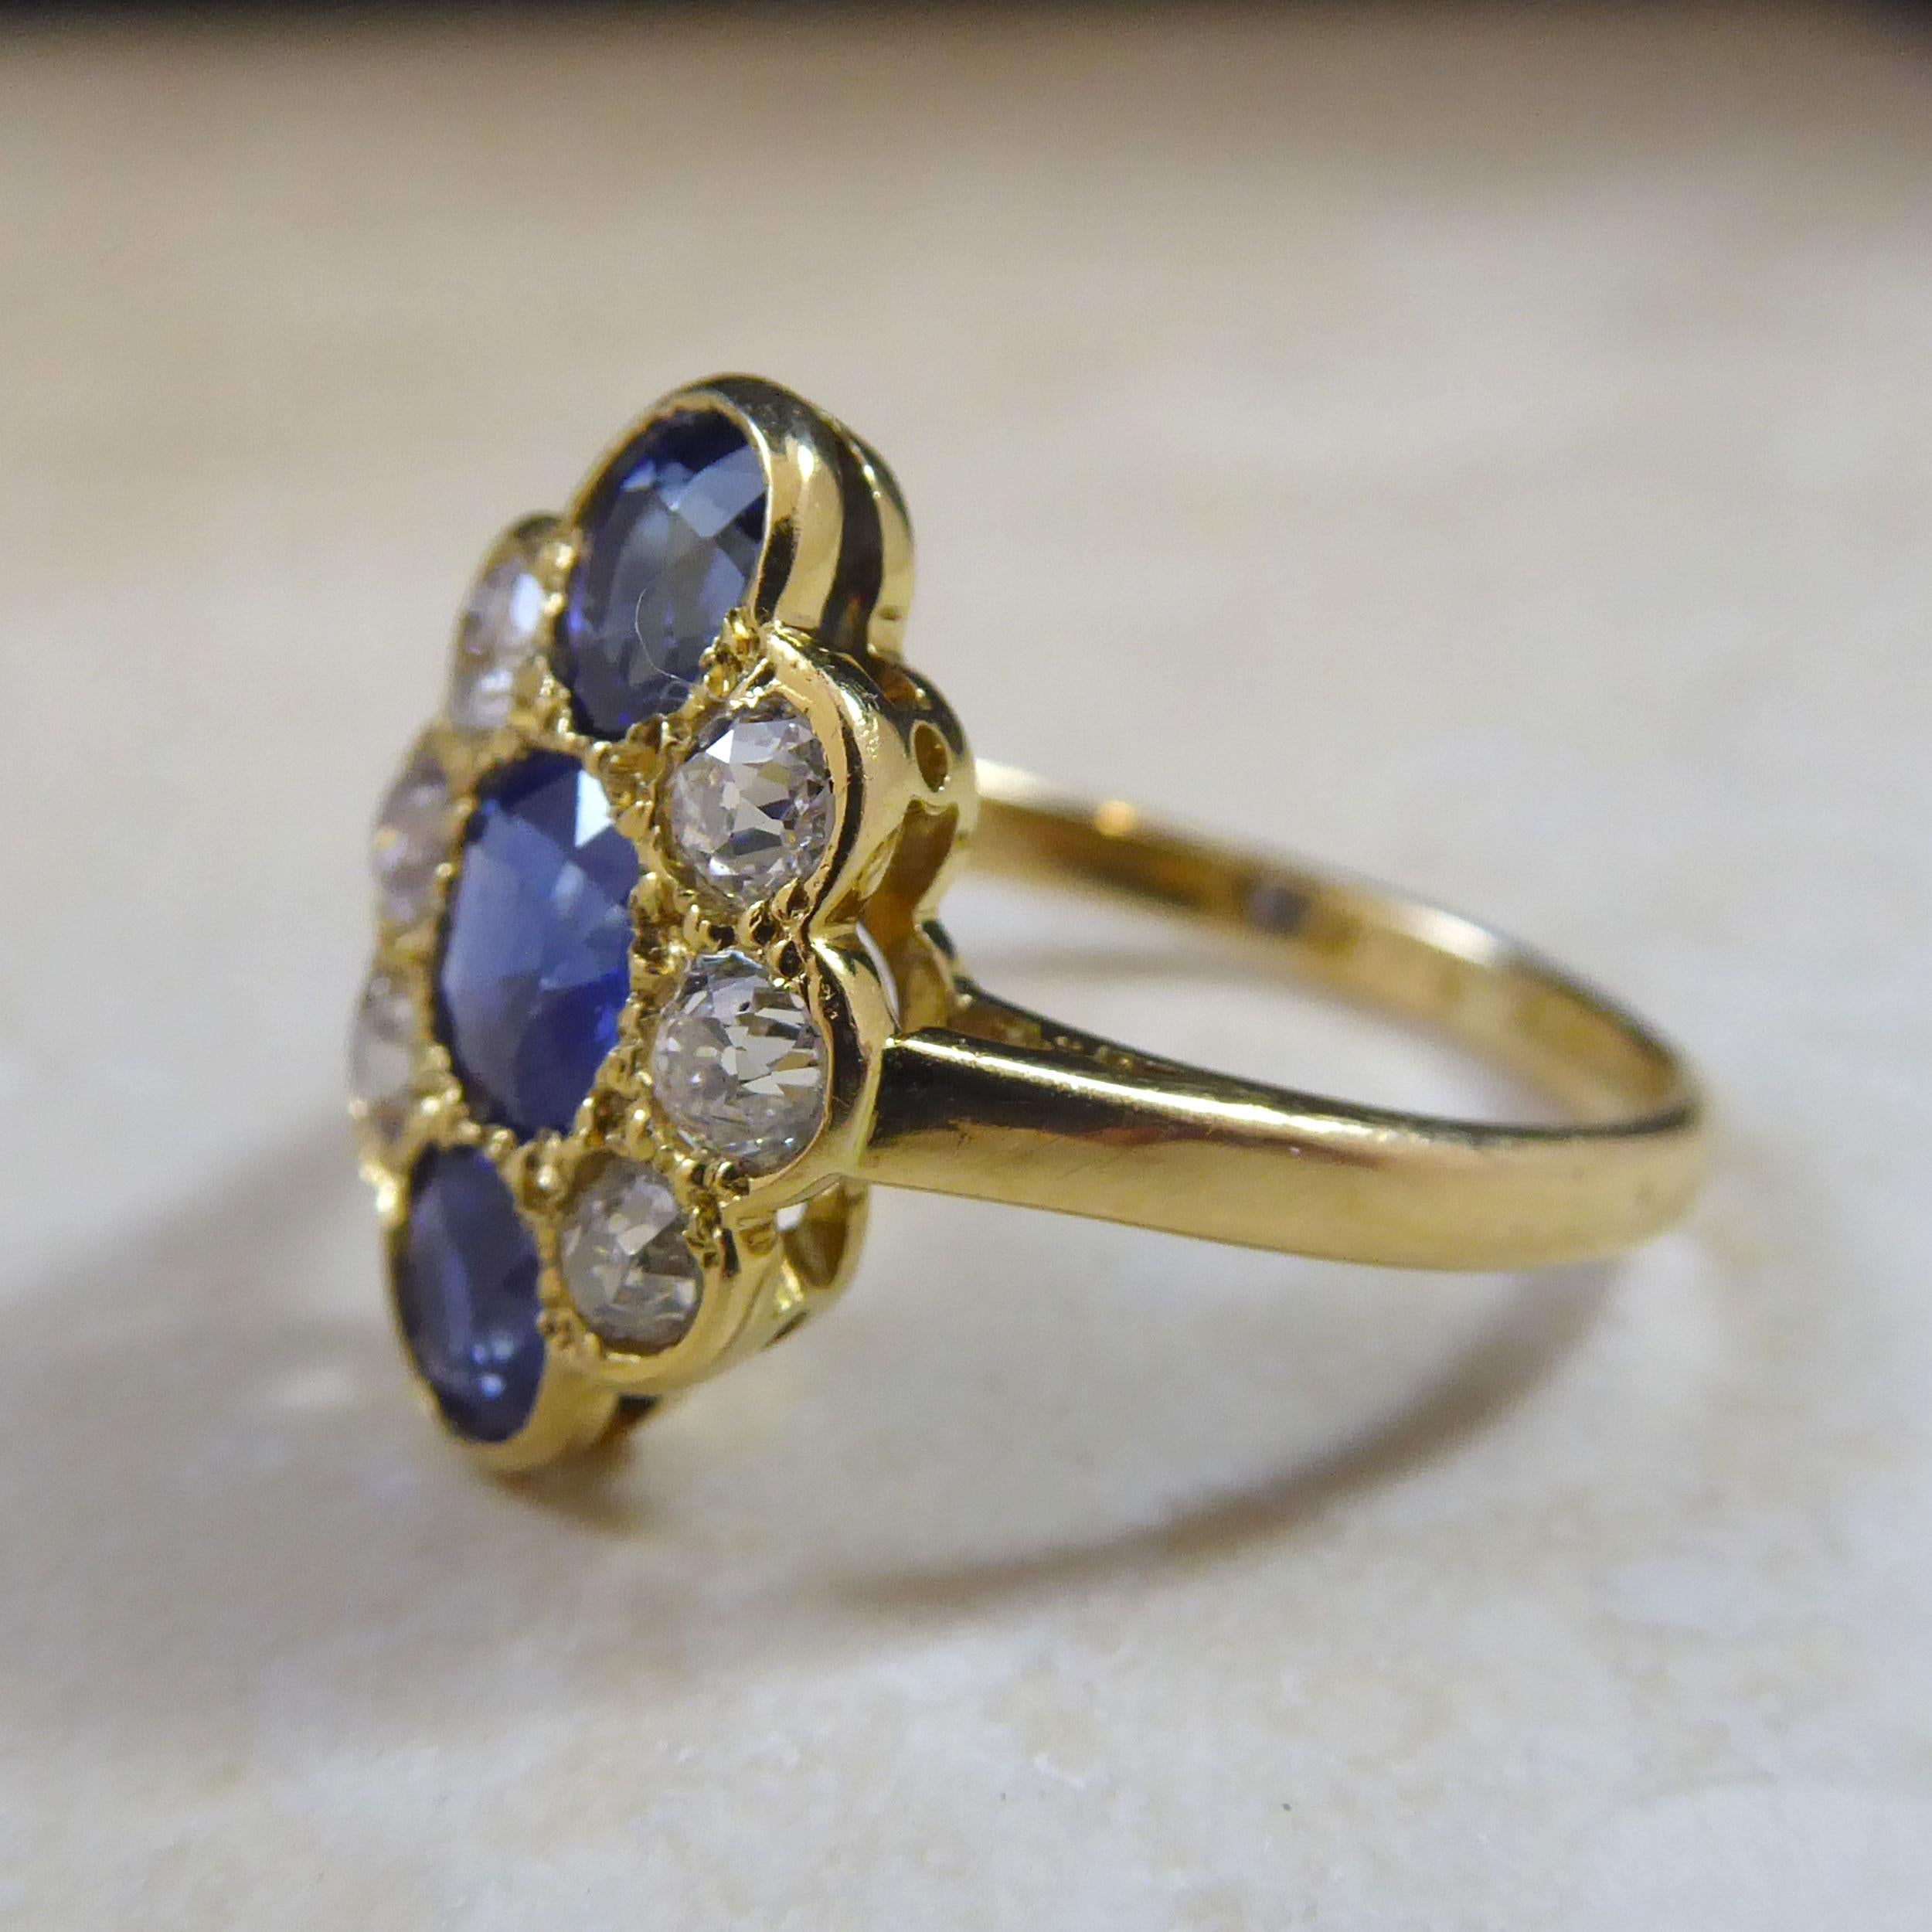 An Edwardian era sapphire and diamond oval cluster ring set with three oval, mixed-cut, medium blue sapphire arranged in a row down the finger.  To each side three old Europan Cut Diamonds.  The gemstones are all held in rub over and beaded settings